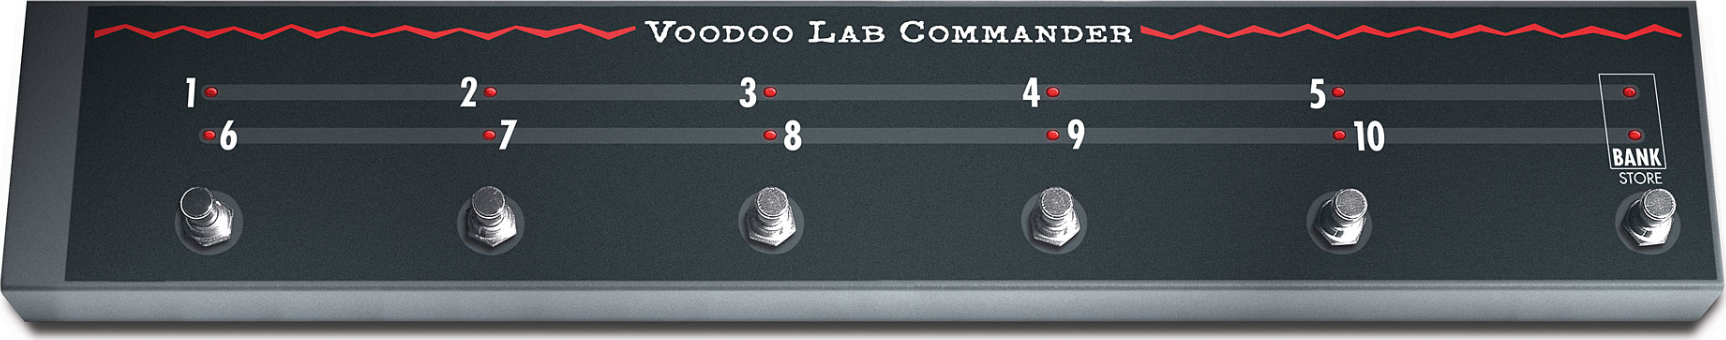 Voodoo Lab Commander Effects & Amp Switching System - Pedalera de control - Main picture